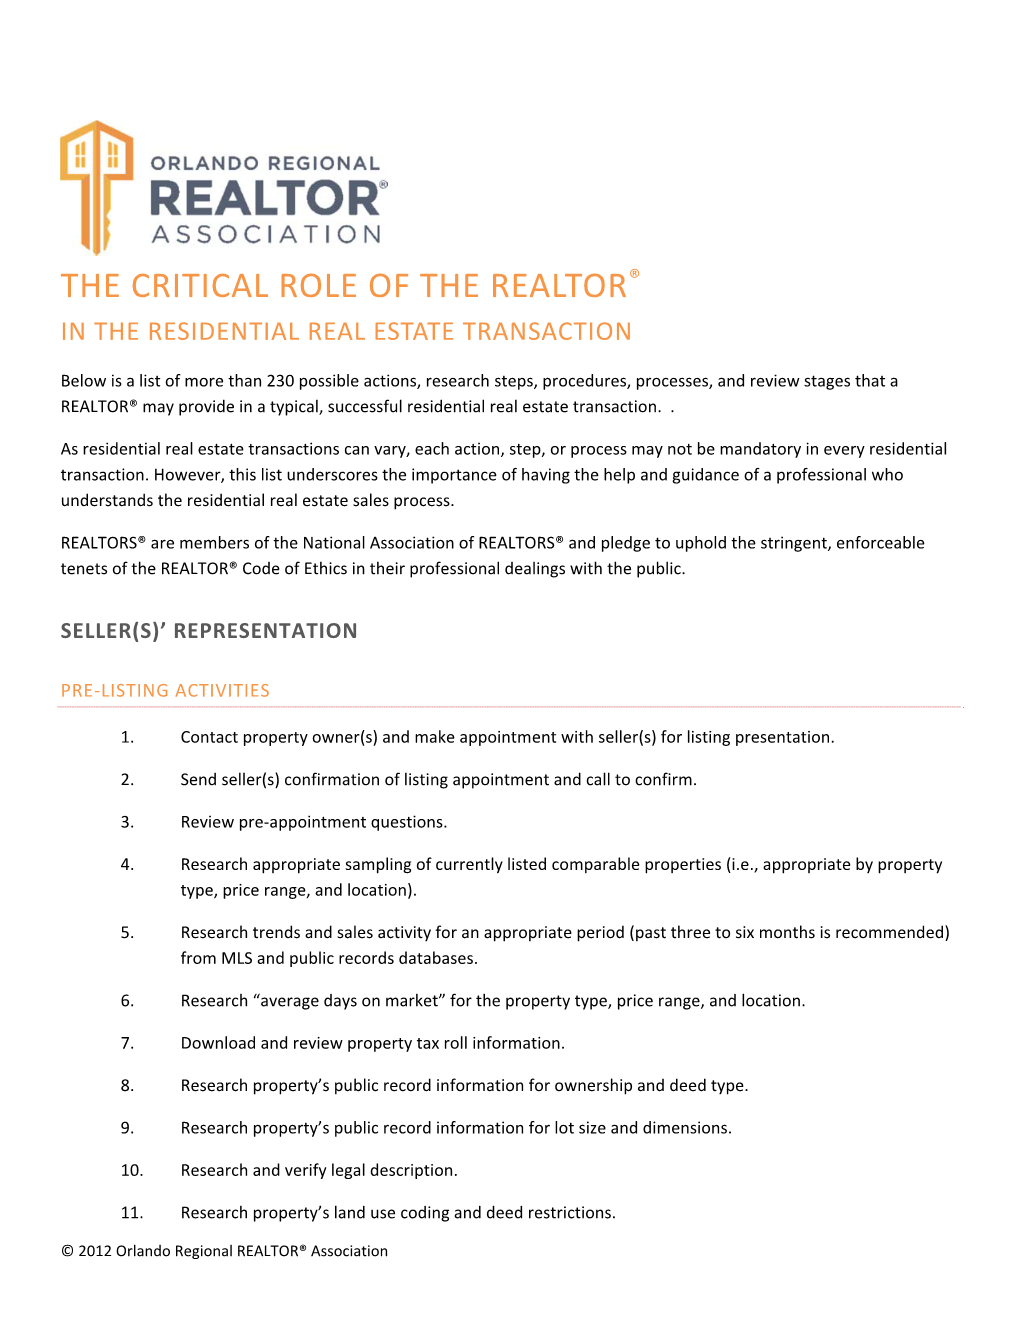 The Critical Role of the Realtor® in the Residential Real Estate Transaction